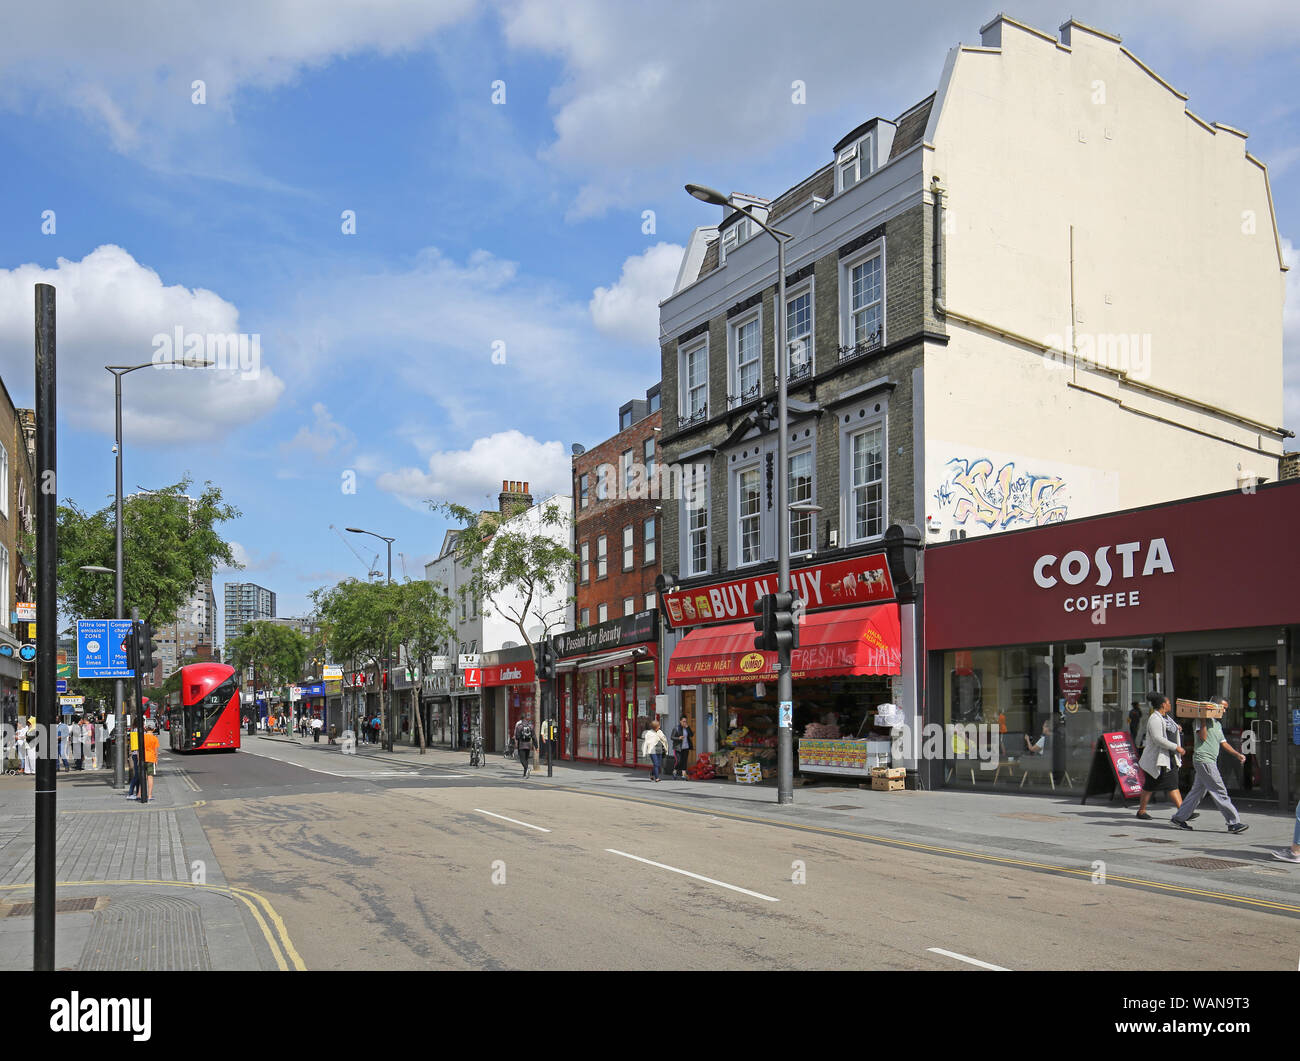 Walworth Road, London, UK. Close to Elephant and Castle, a formerly run-down area now being controversially redeveloped with new luxury housing. Stock Photo